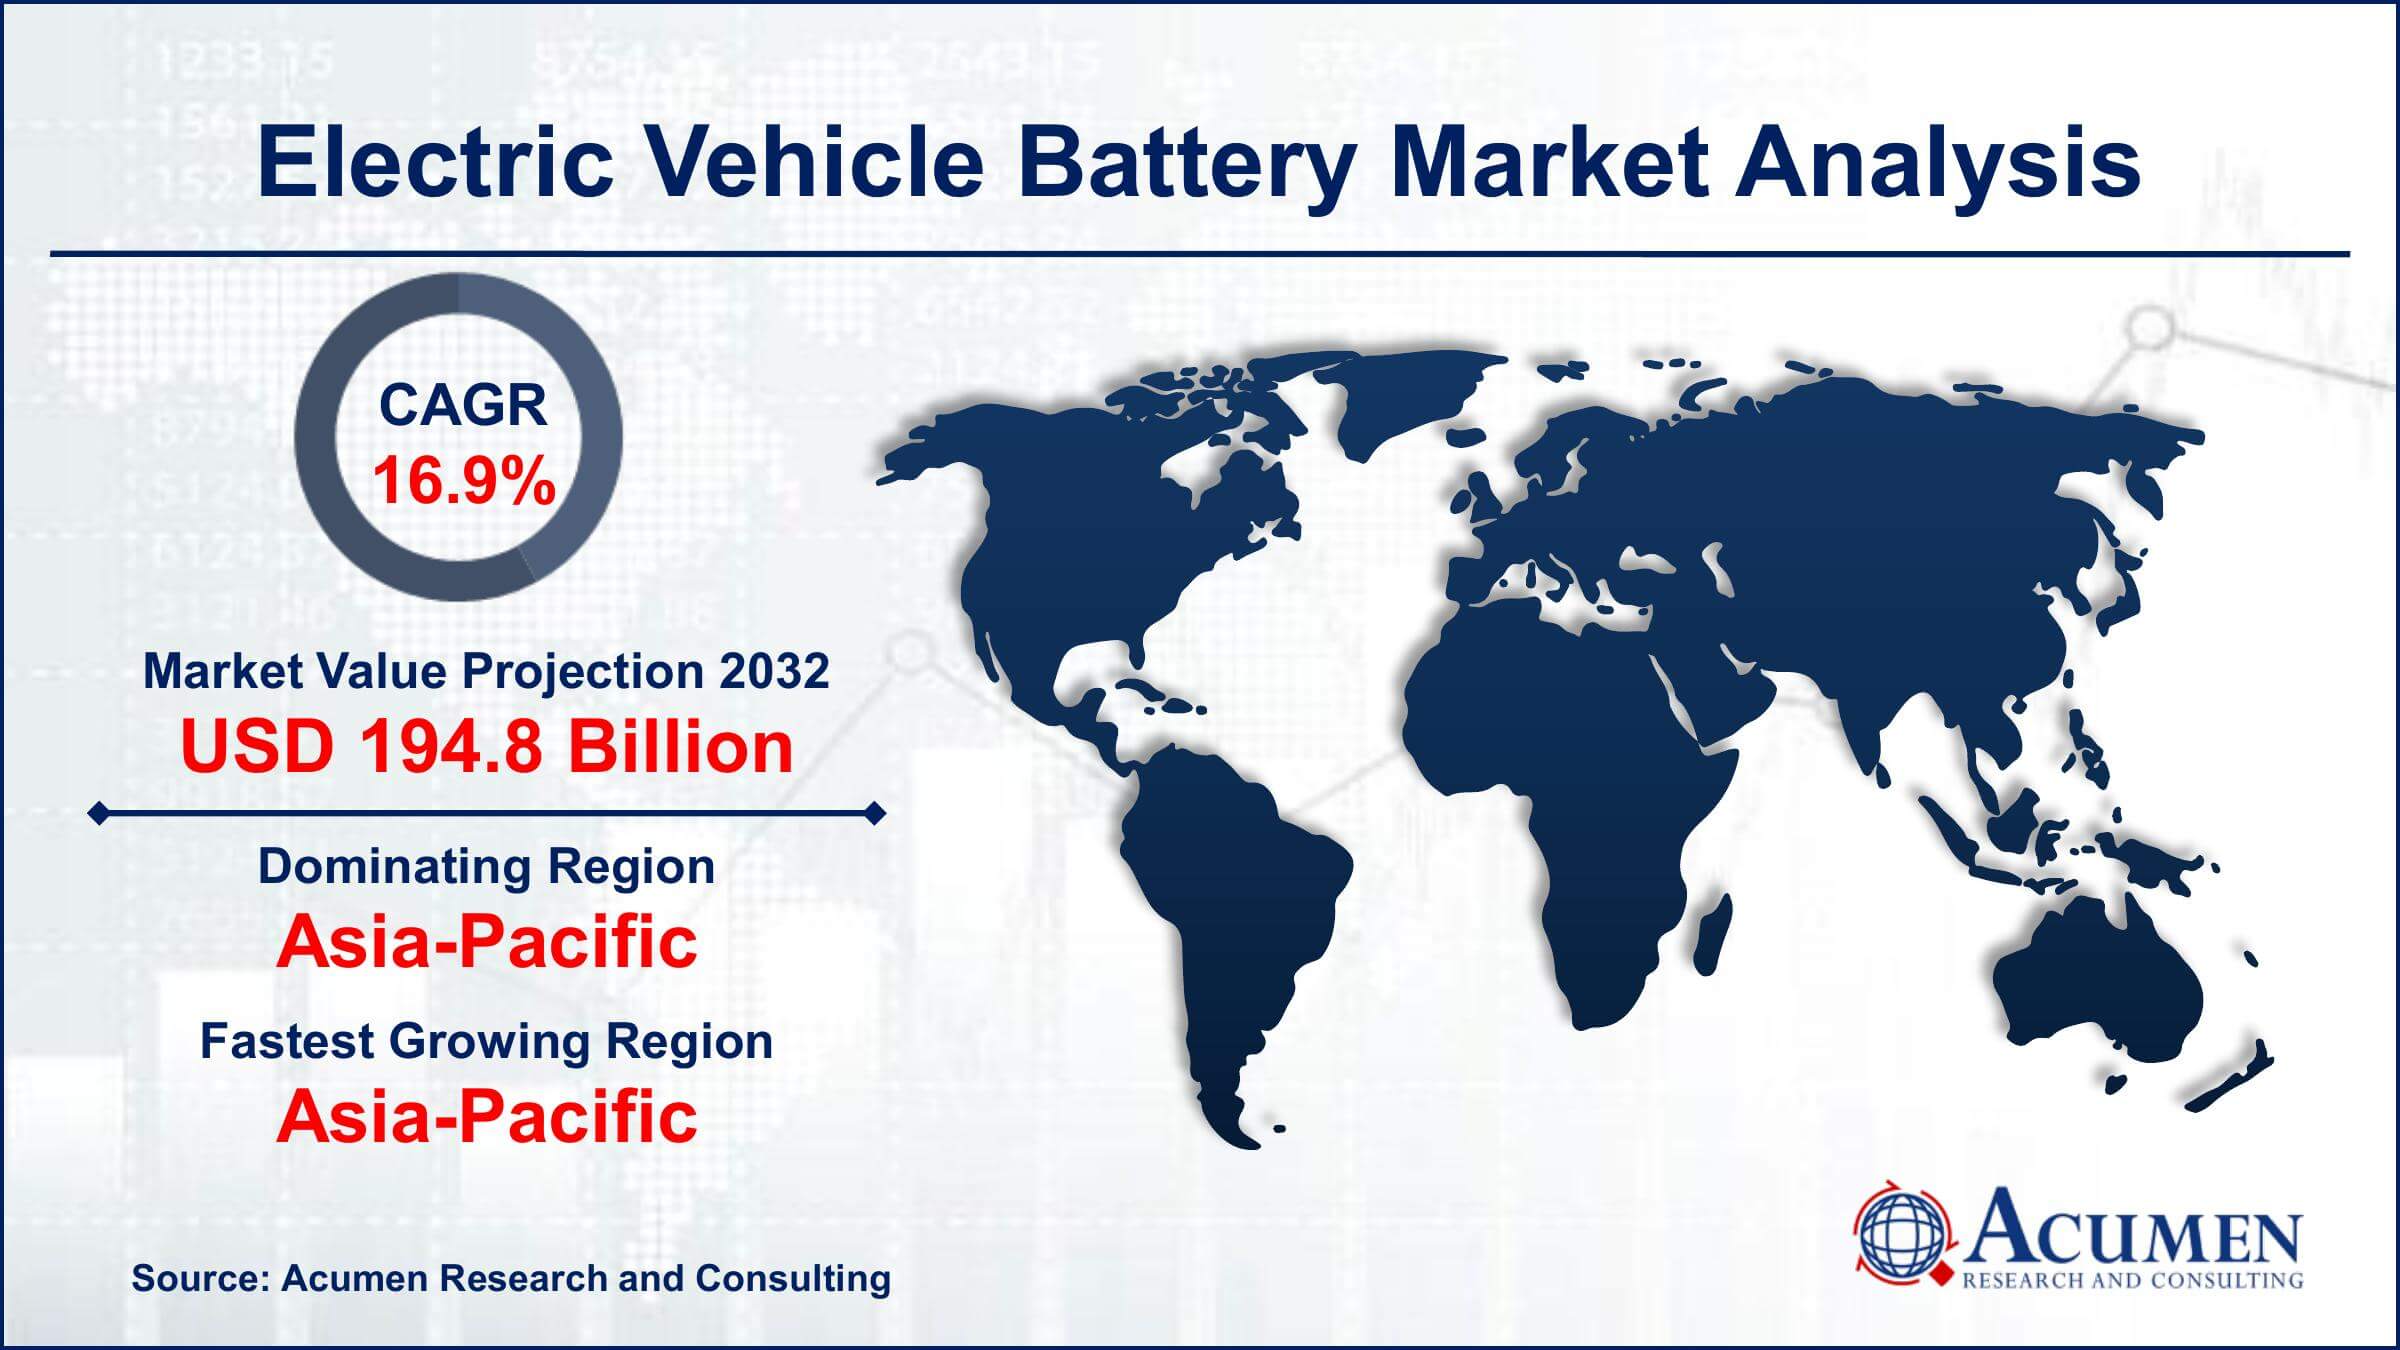 Global Electric Vehicle Battery Market Trends